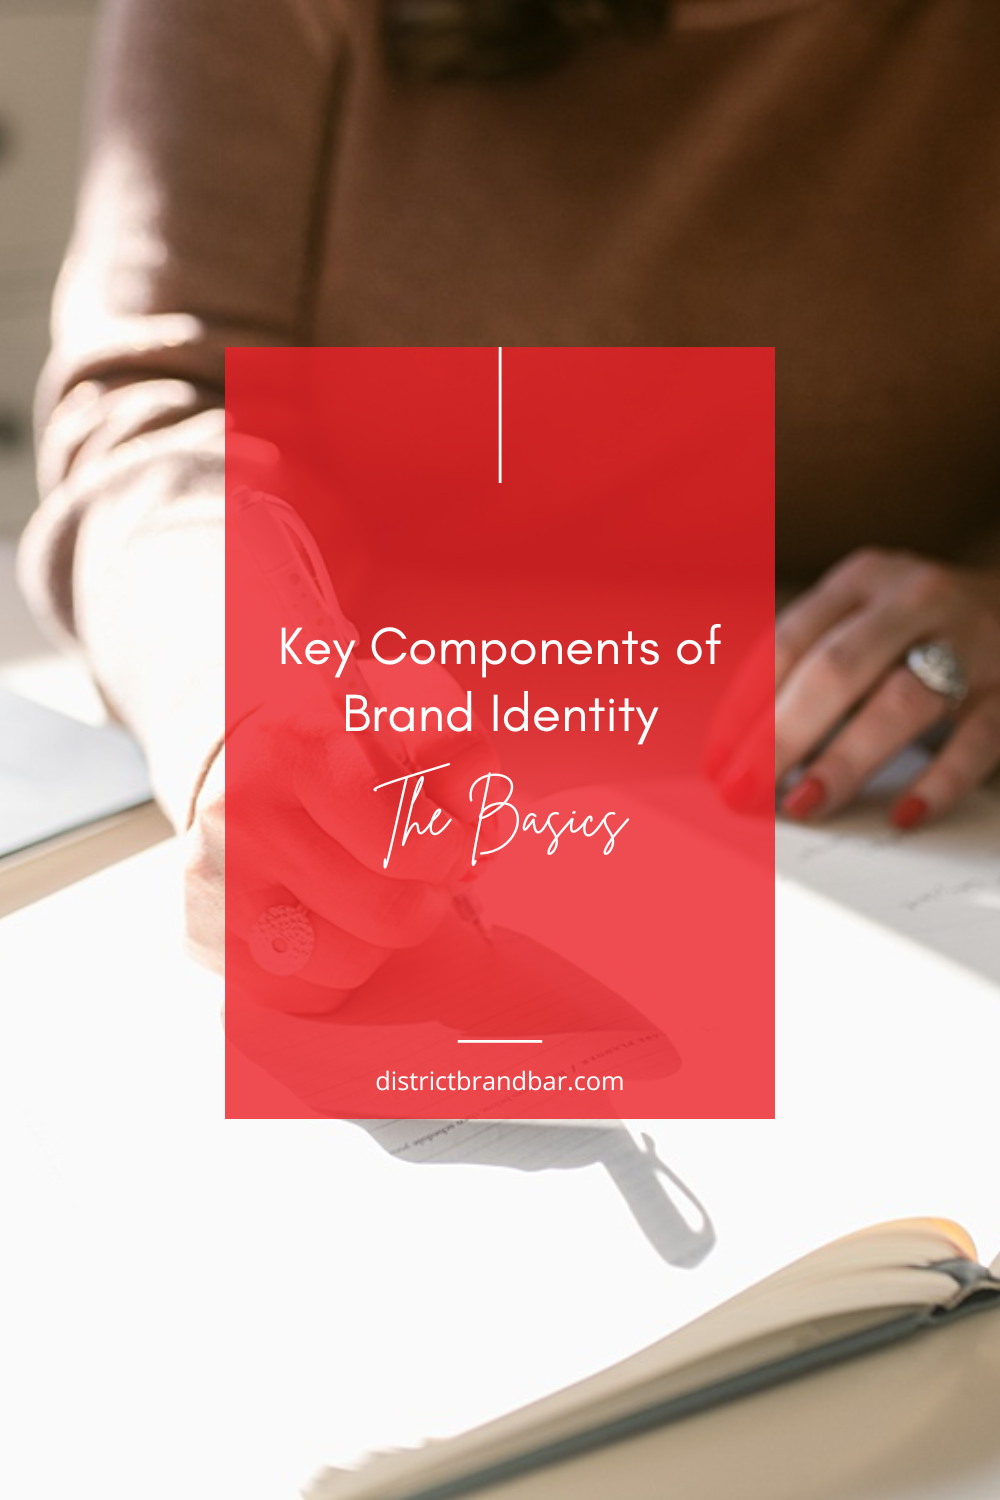 The Basics: The Elements that Make Up A Brand's Identity